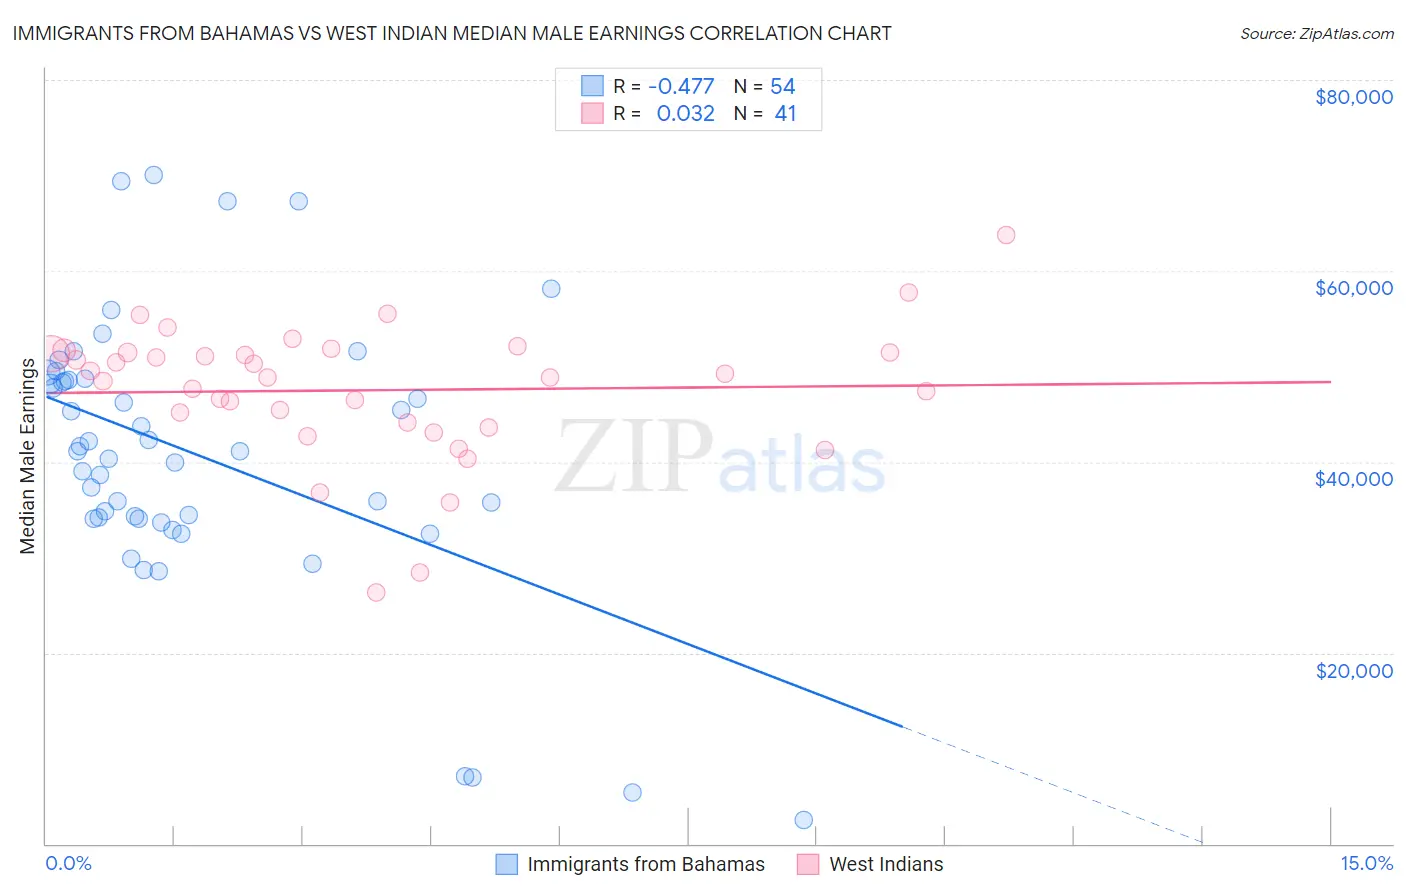 Immigrants from Bahamas vs West Indian Median Male Earnings